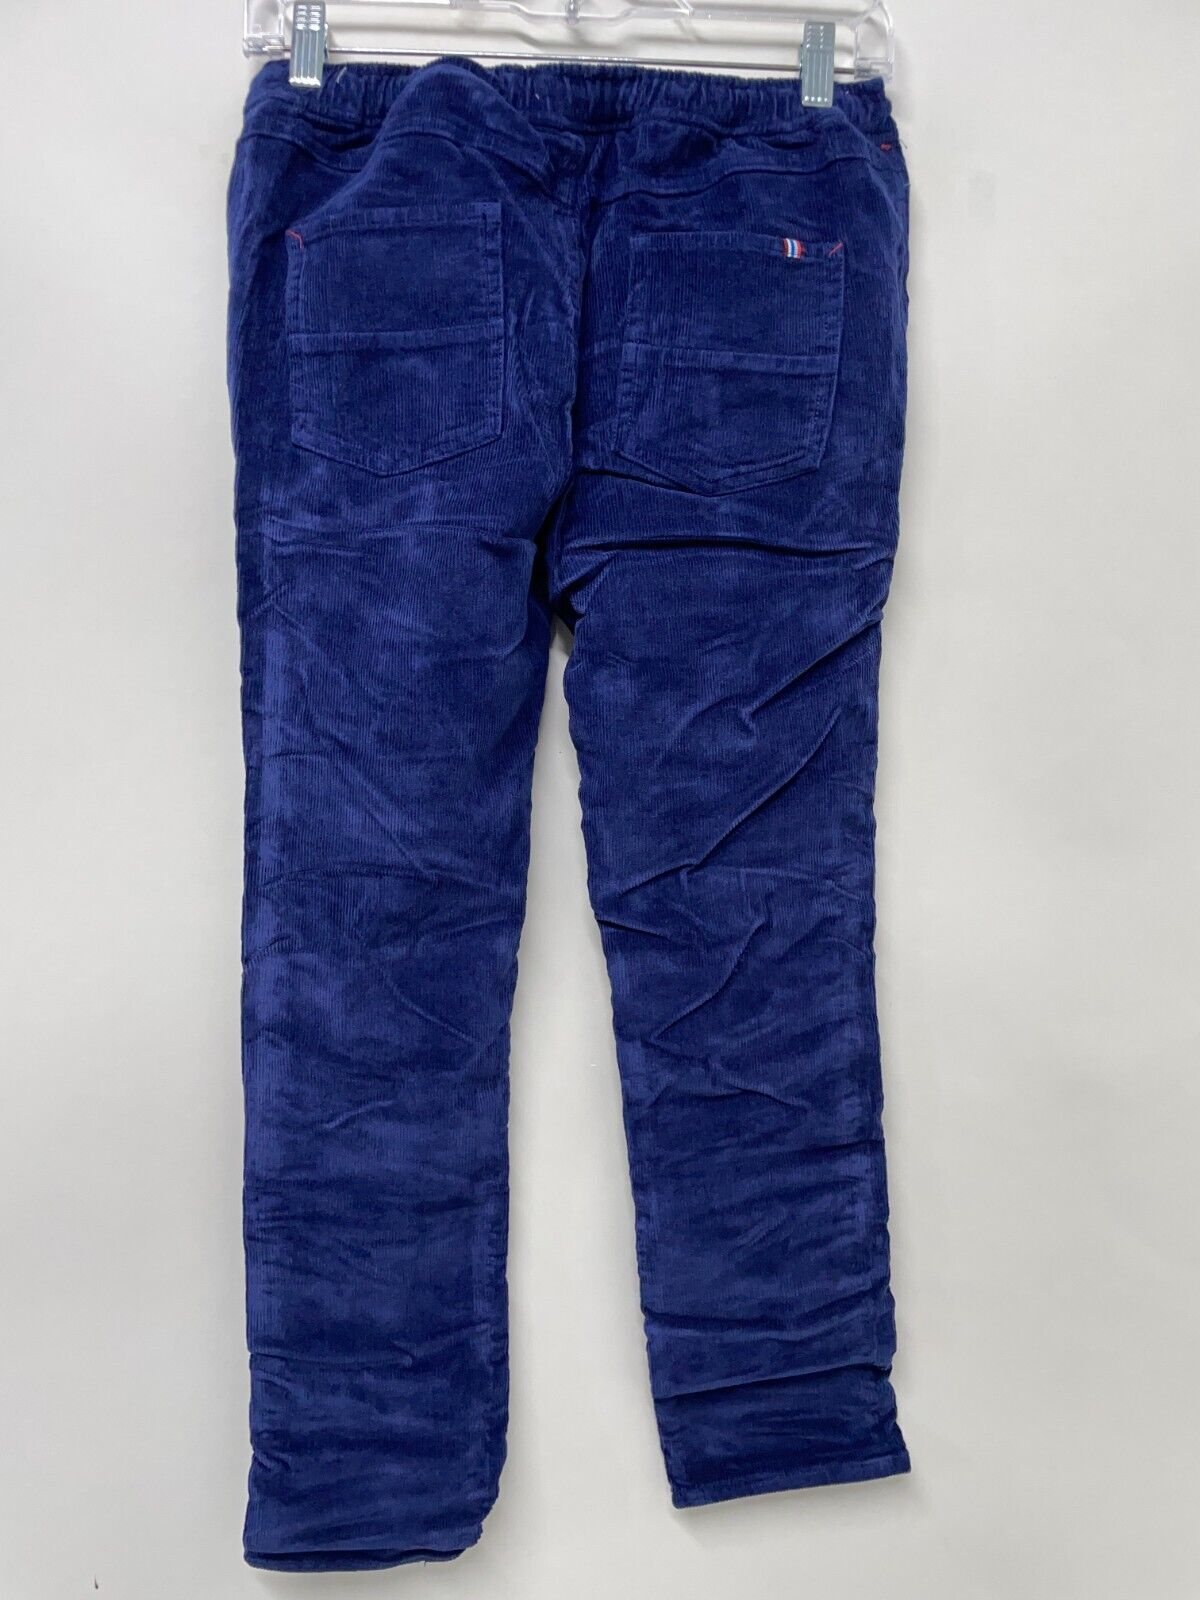 Boden Boys 11Y Relaxed Slim Pull-on Pants Dark Blue Corduroy Trousers B1249 Pant